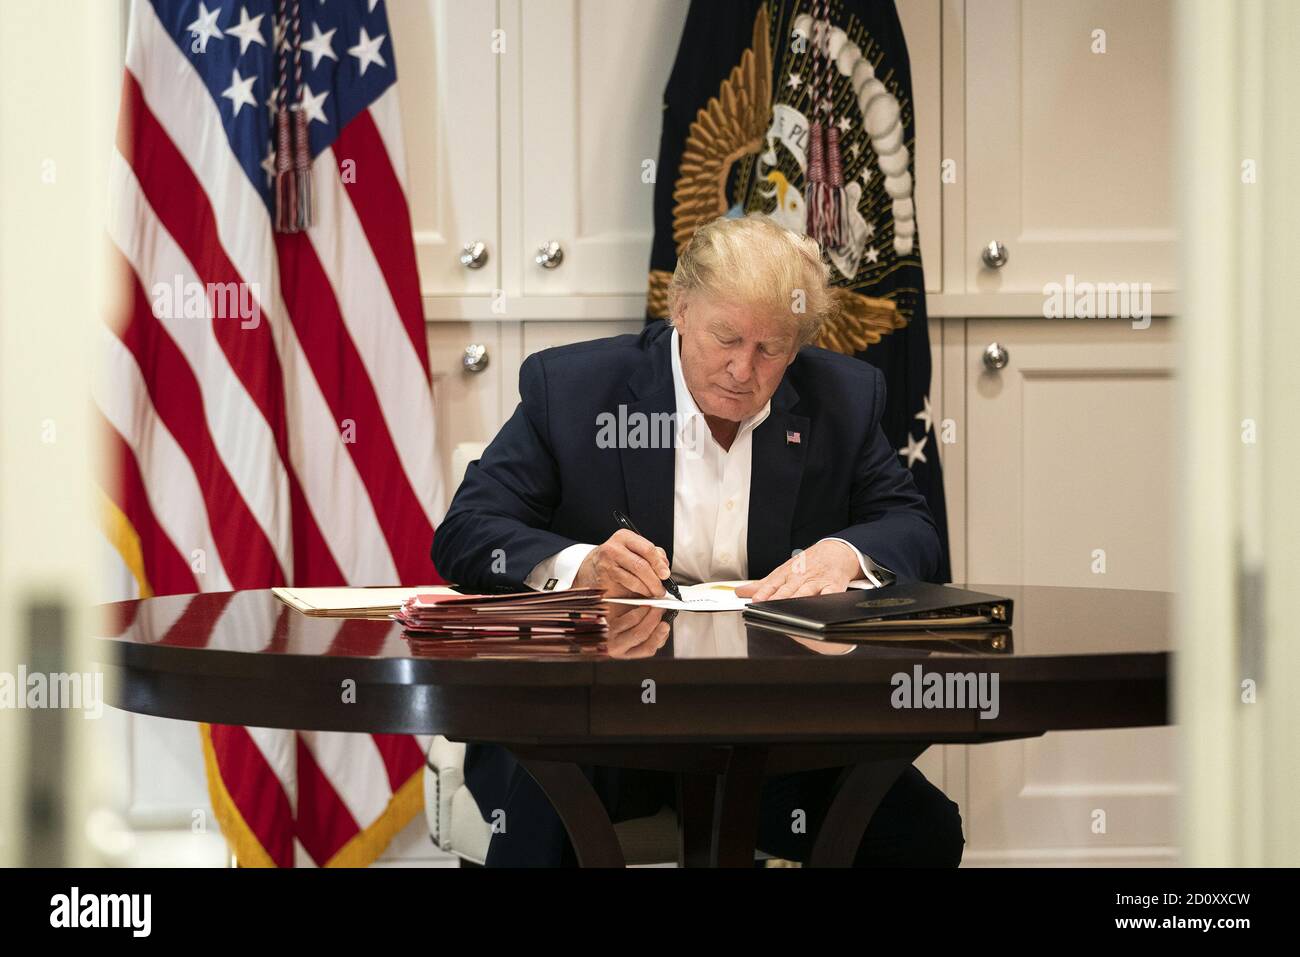 Bethesda, United States Of America. 03rd Oct, 2020. President Donald J. Trump works in the Presidential Suite at Walter Reed National Military Medical Center in Bethesda, Md. Saturday, Oct. 3, 2020, after testing positive for COVID-19. People: President Donald Trump Credit: Storms Media Group/Alamy Live News Stock Photo